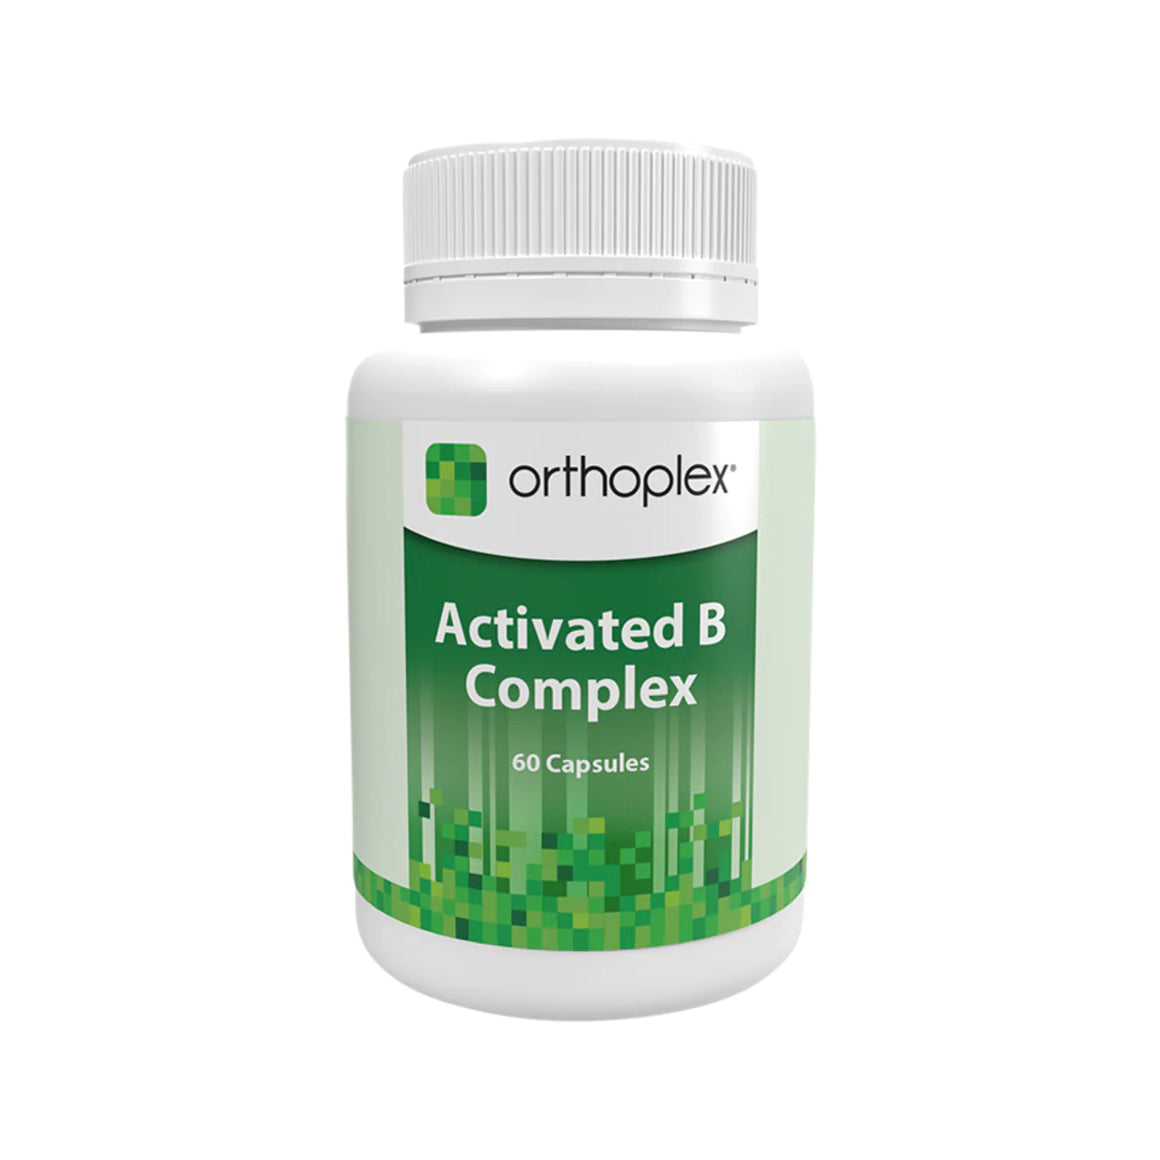 Orthoplex Green Label Activated B Complex 60 Capsules (Formerly Blue Label)